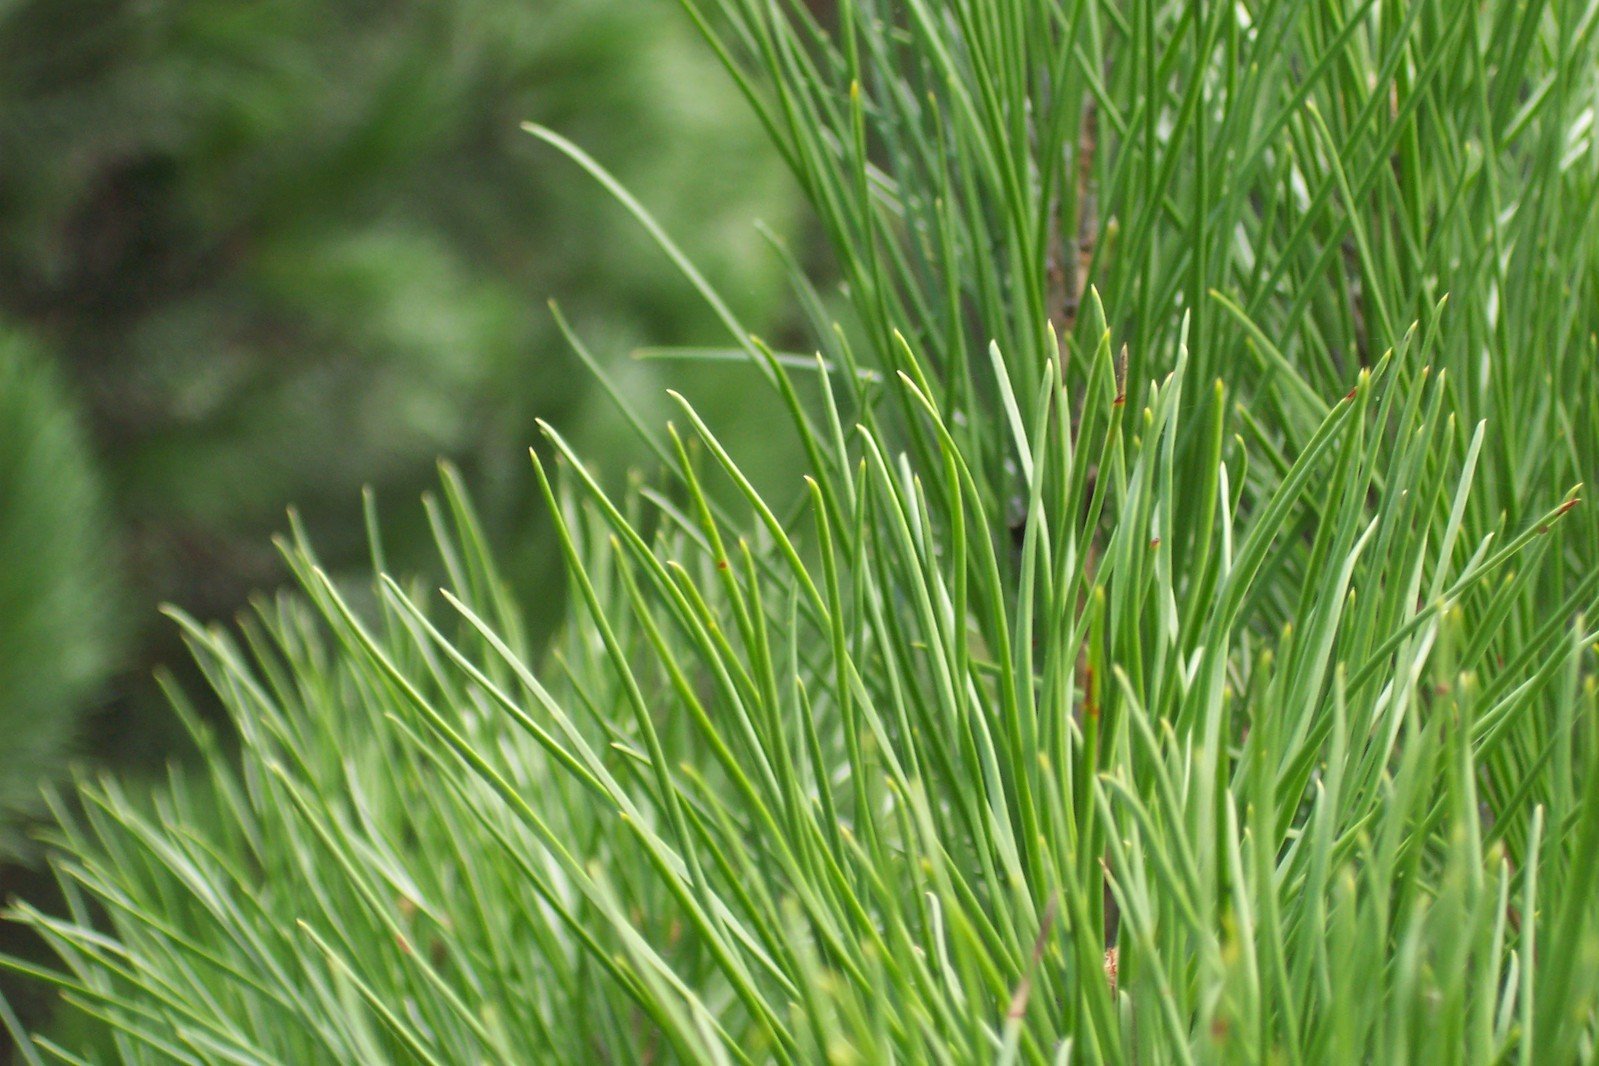 a close up of some grass near bushes